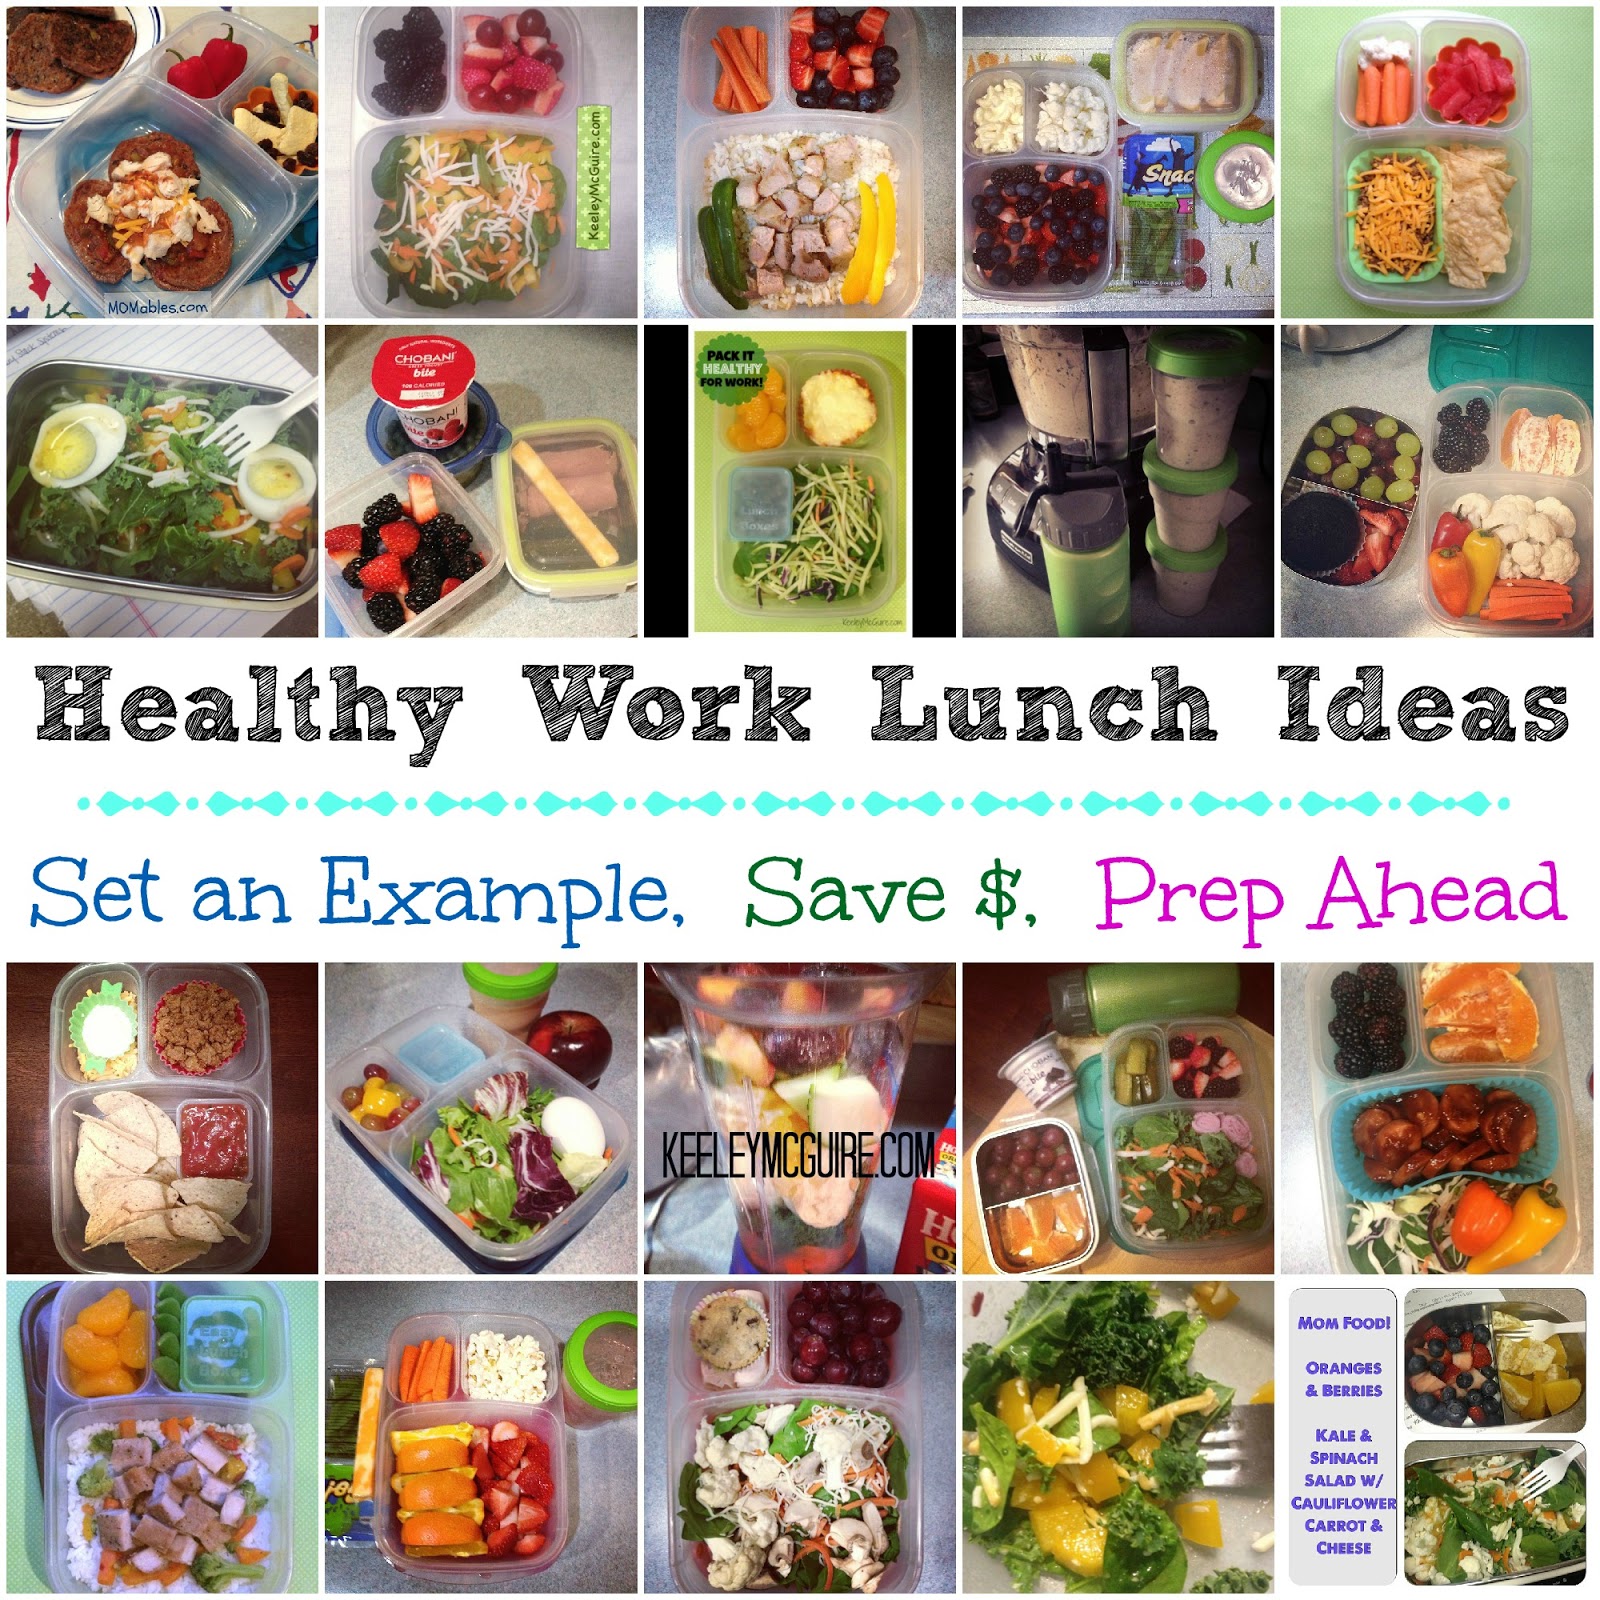 Gluten Free & Allergy Friendly: Lunch Made Easy: Healthy Work Lunches